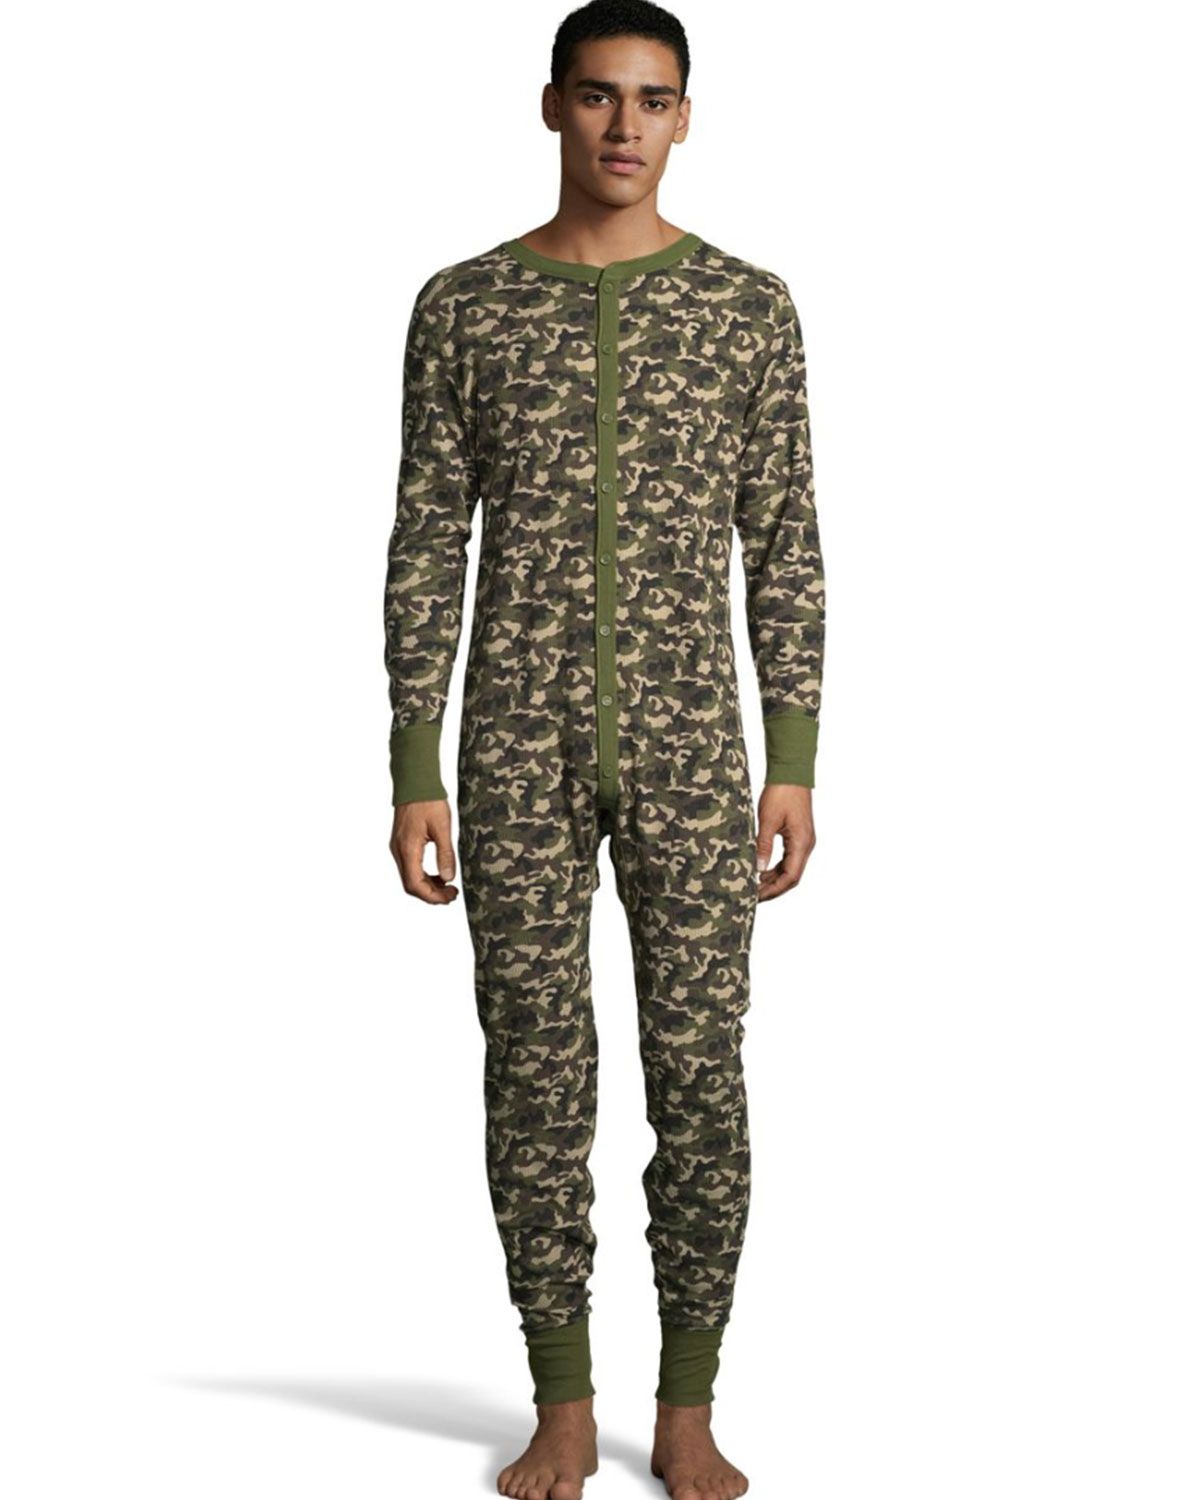 Hanes Mens Big and Tall Camo Waffle Knit Thermal Union Suit 3X-4X-125449